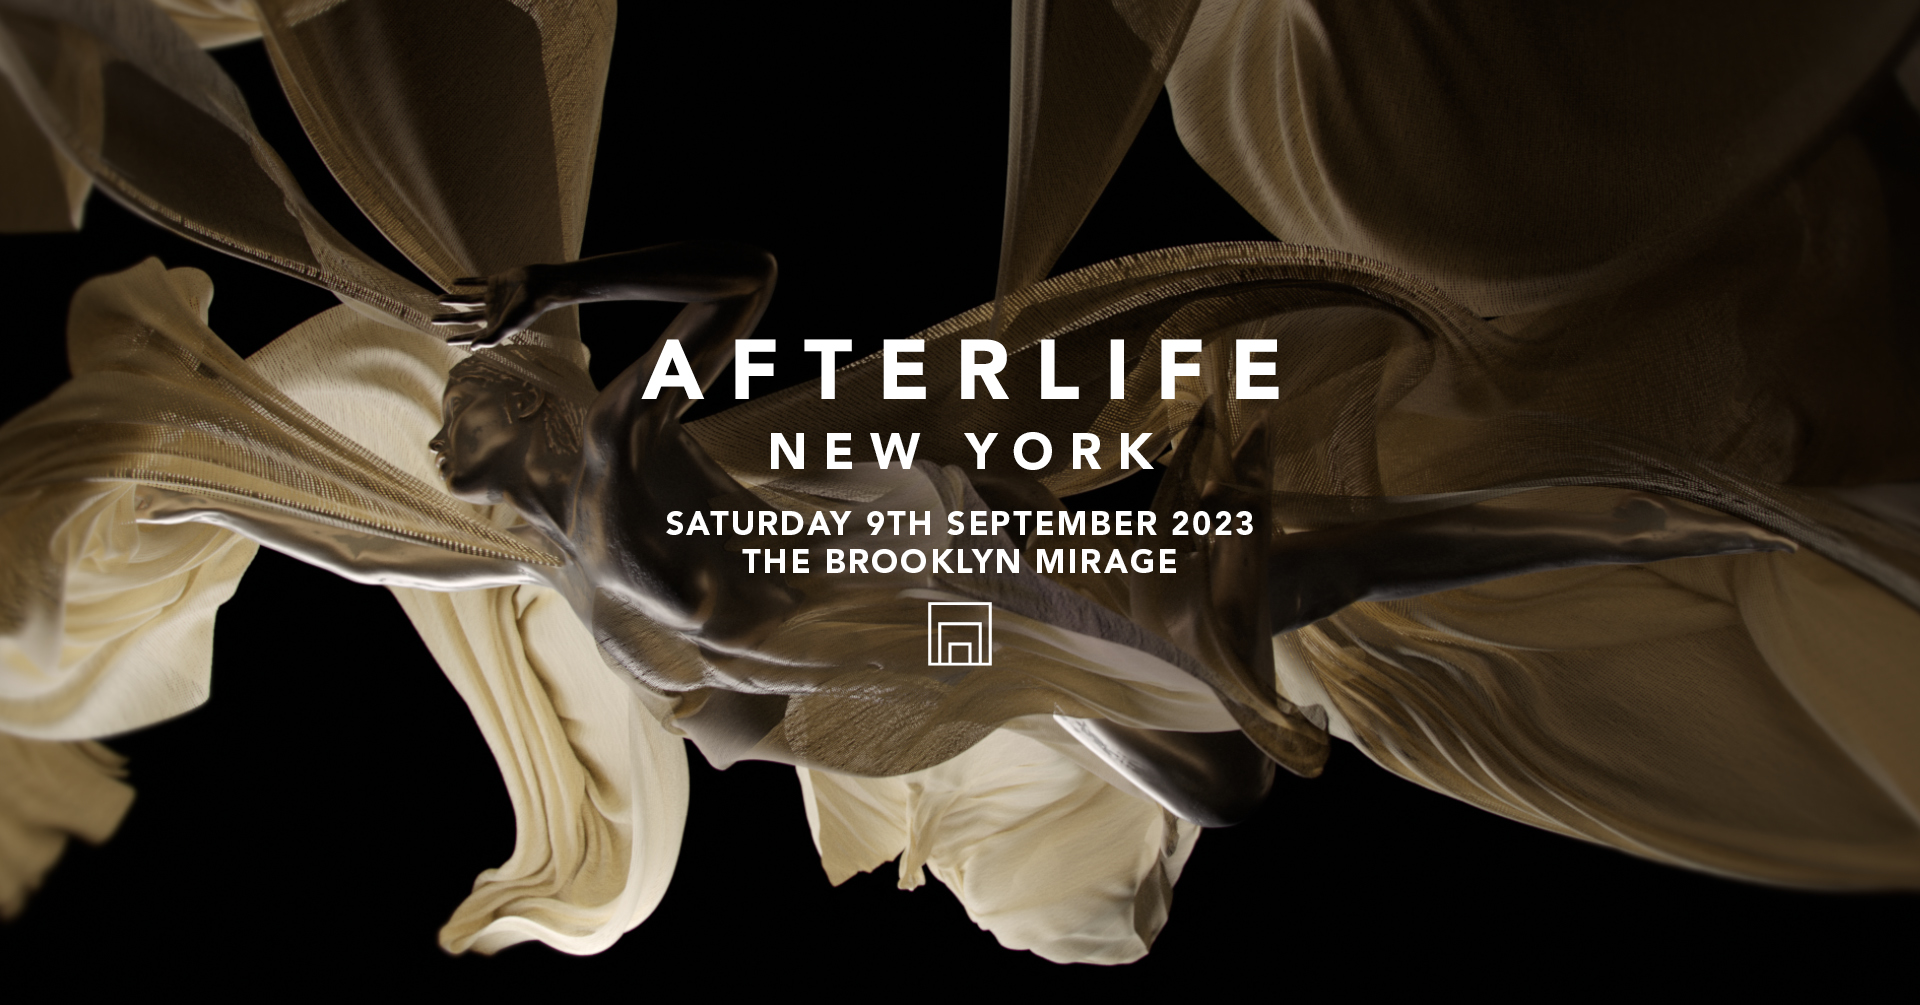 Afterlife Tel Aviv - Festival Lineup, Dates and Location